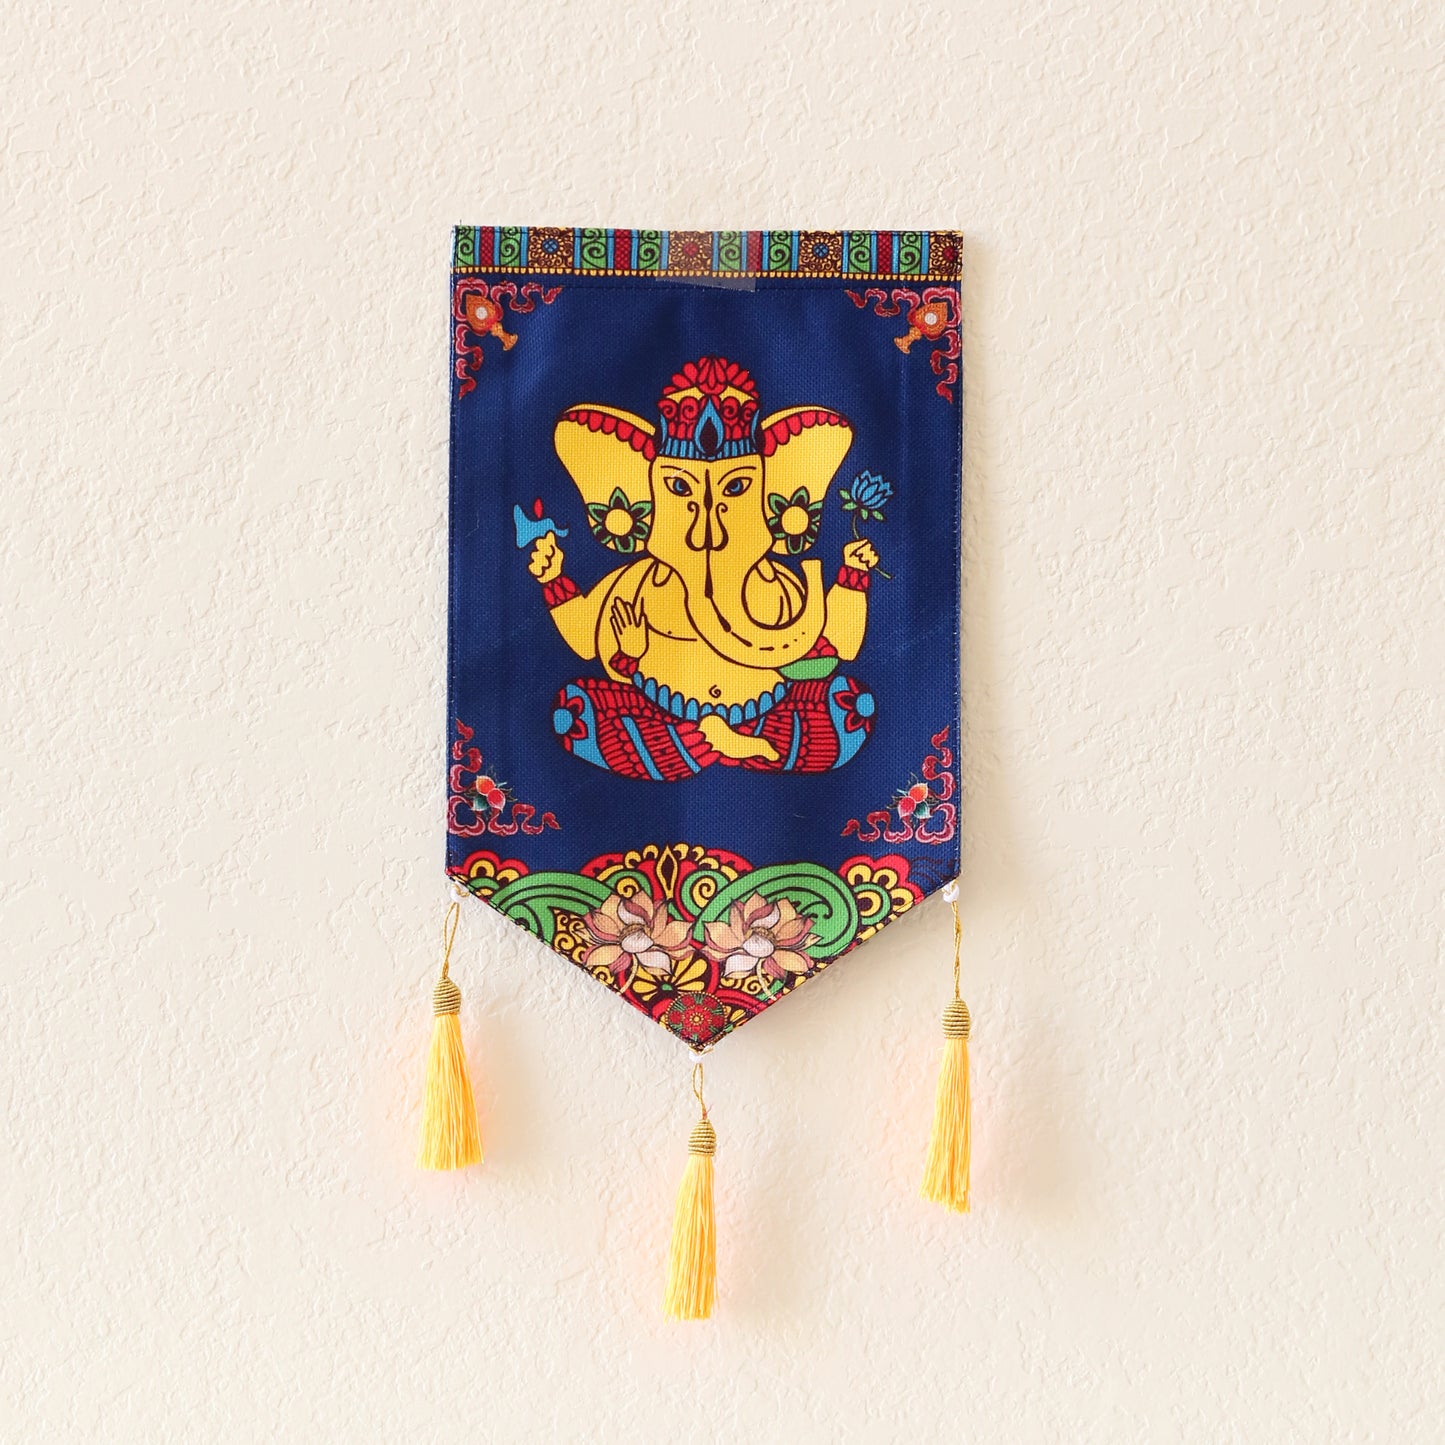 Thai Style Buddhist Om Symbol Small Canvas Tapestry Wall Hanging Tassels, 9.5"X16", Asian Chinese Indian Wall Art